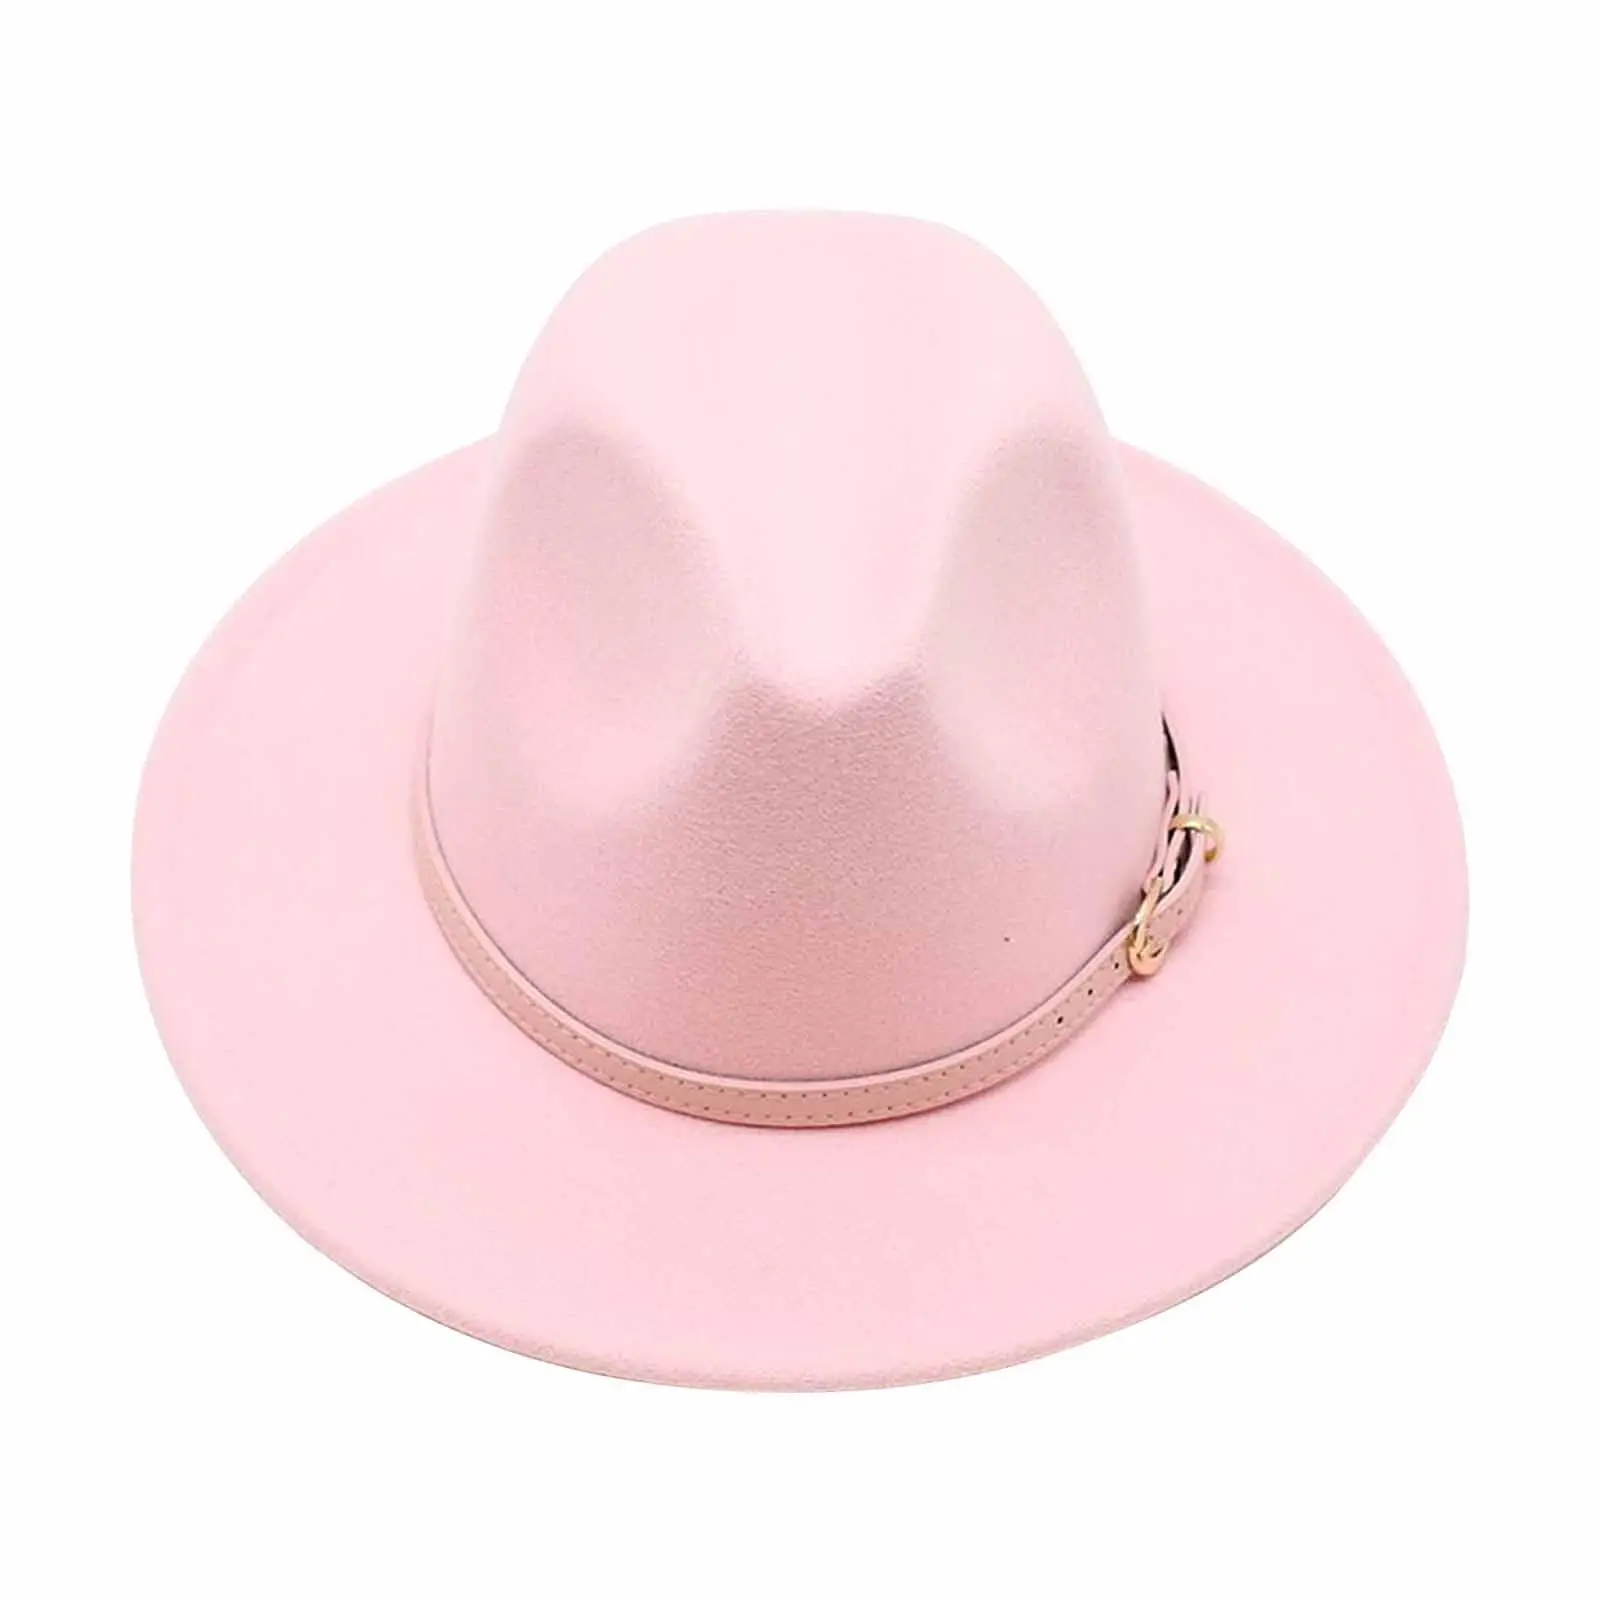 Women Fedora Hats Fashion with Belt Buckle Soft Thermal Floppy Panama Hat Felt Jazz Hat for Holiday Fall Winter Props Prom Party